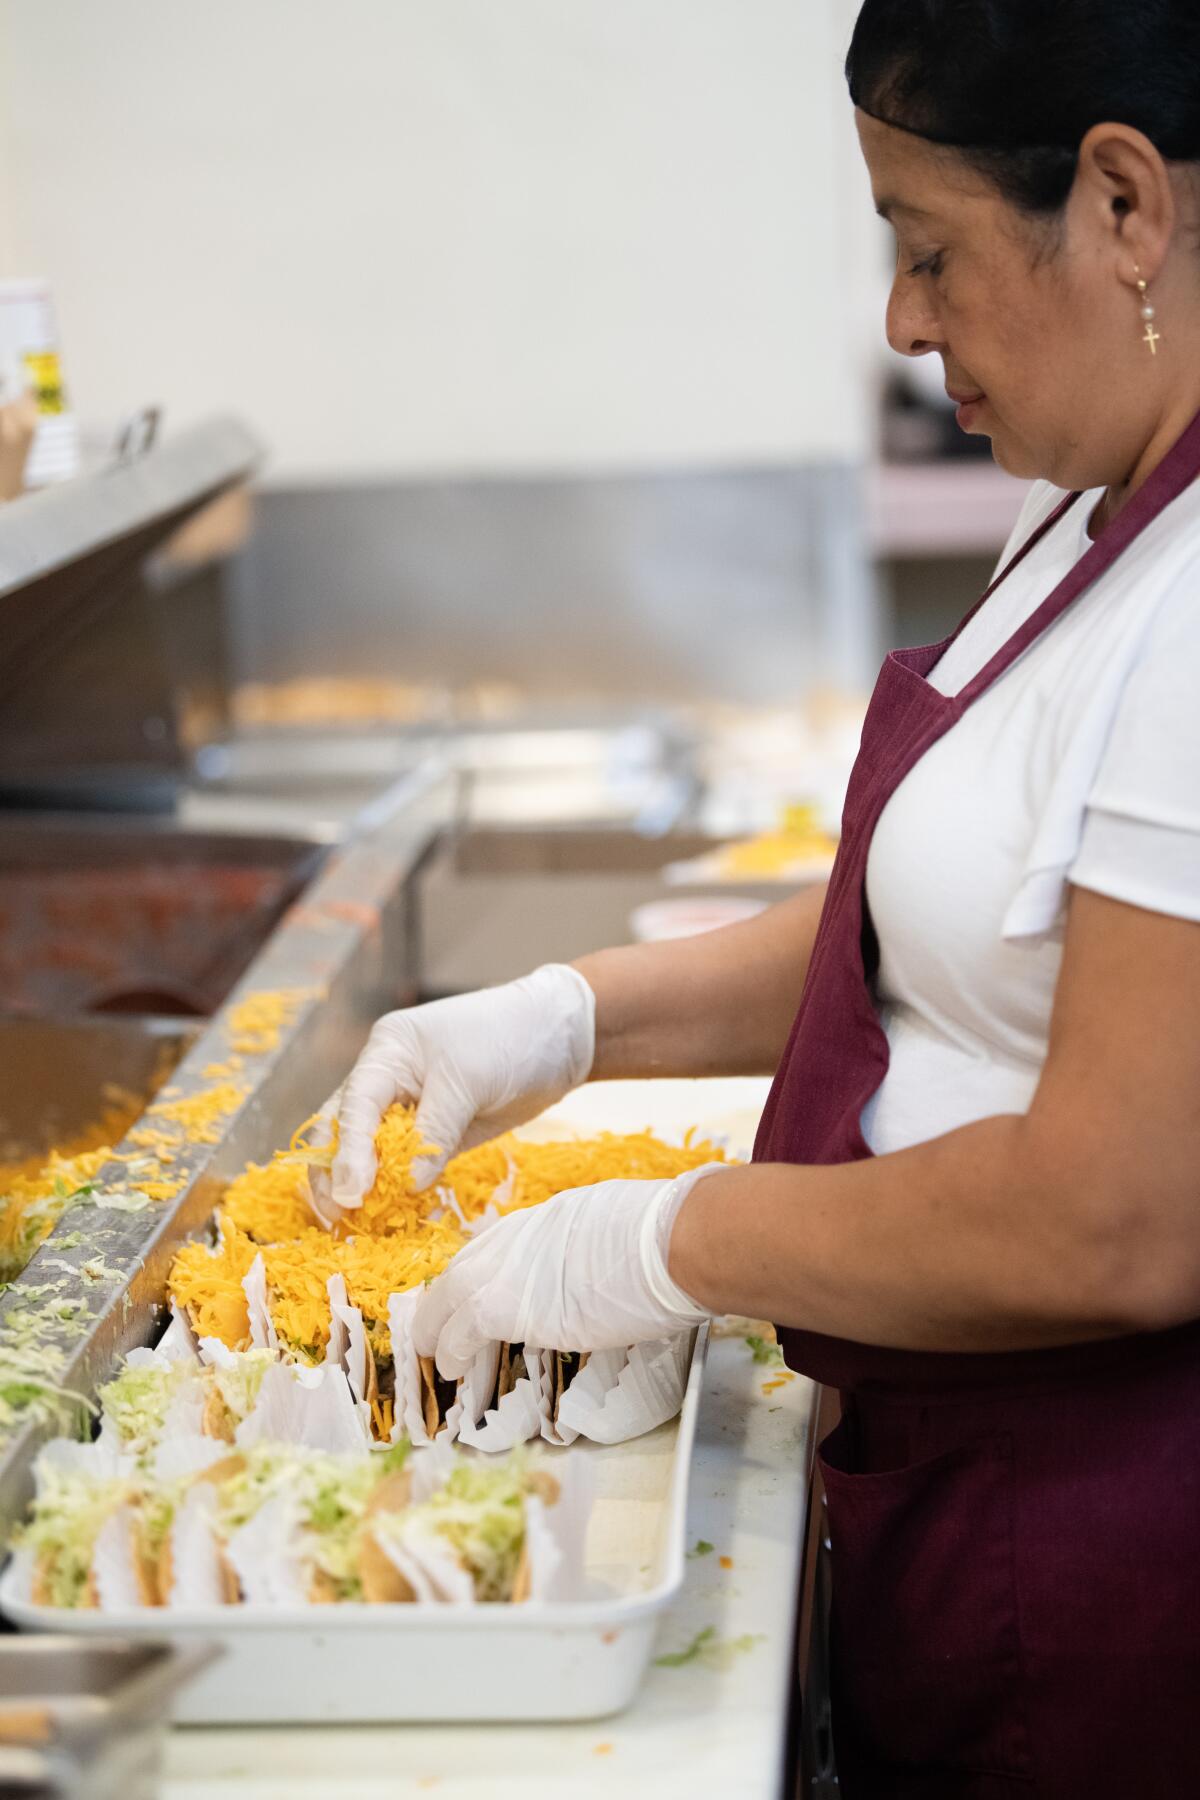 Inside the kitchen at Tito's Tacos, employees prepare large quantities of tacos in an effort to keep up with customer demand and ensure the food line moves quickly and smoothly.